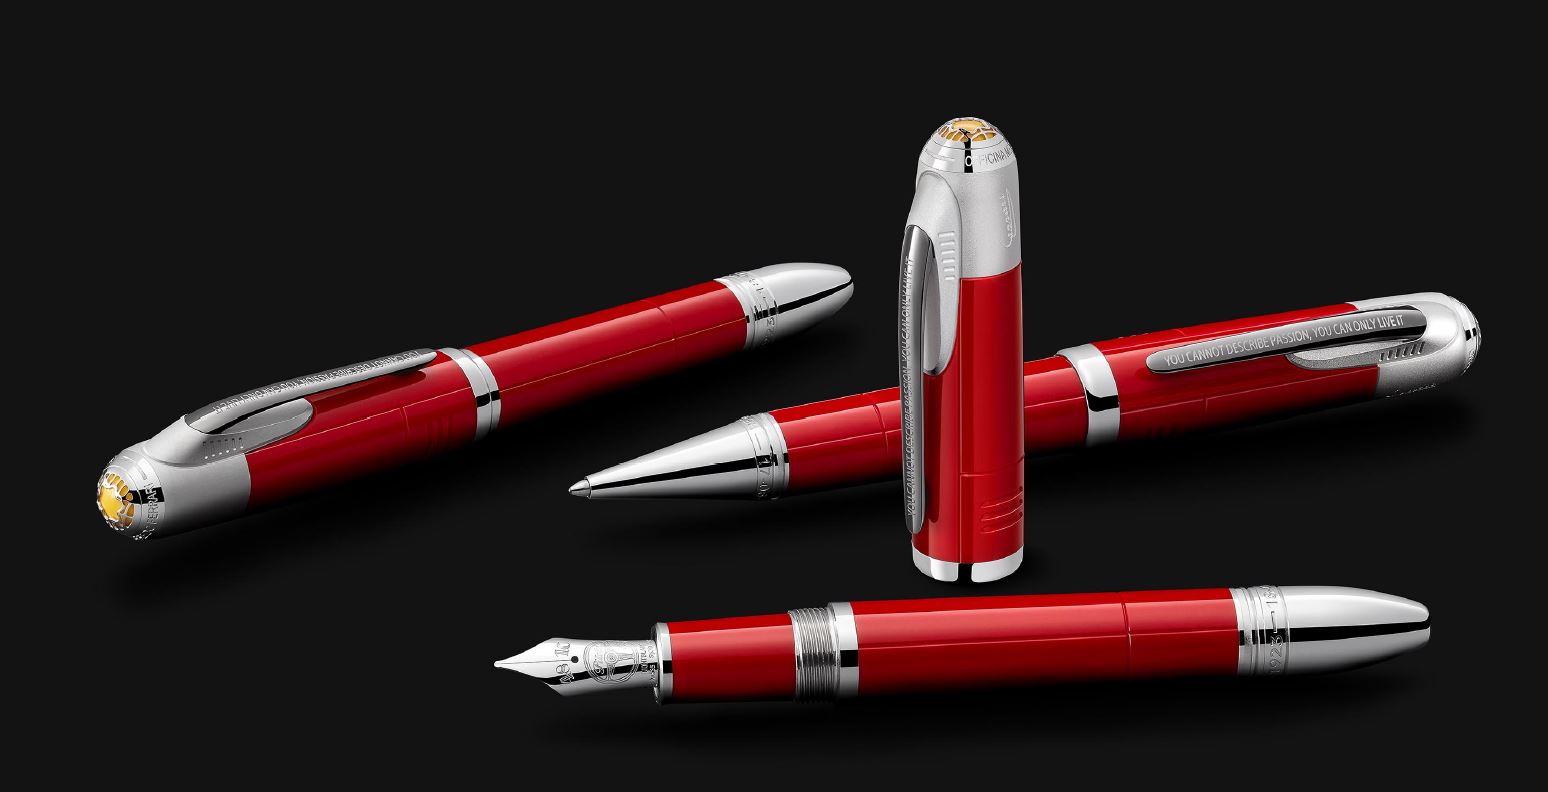 Montblanc Great Characters Enzo Ferrari Special Edition Pen